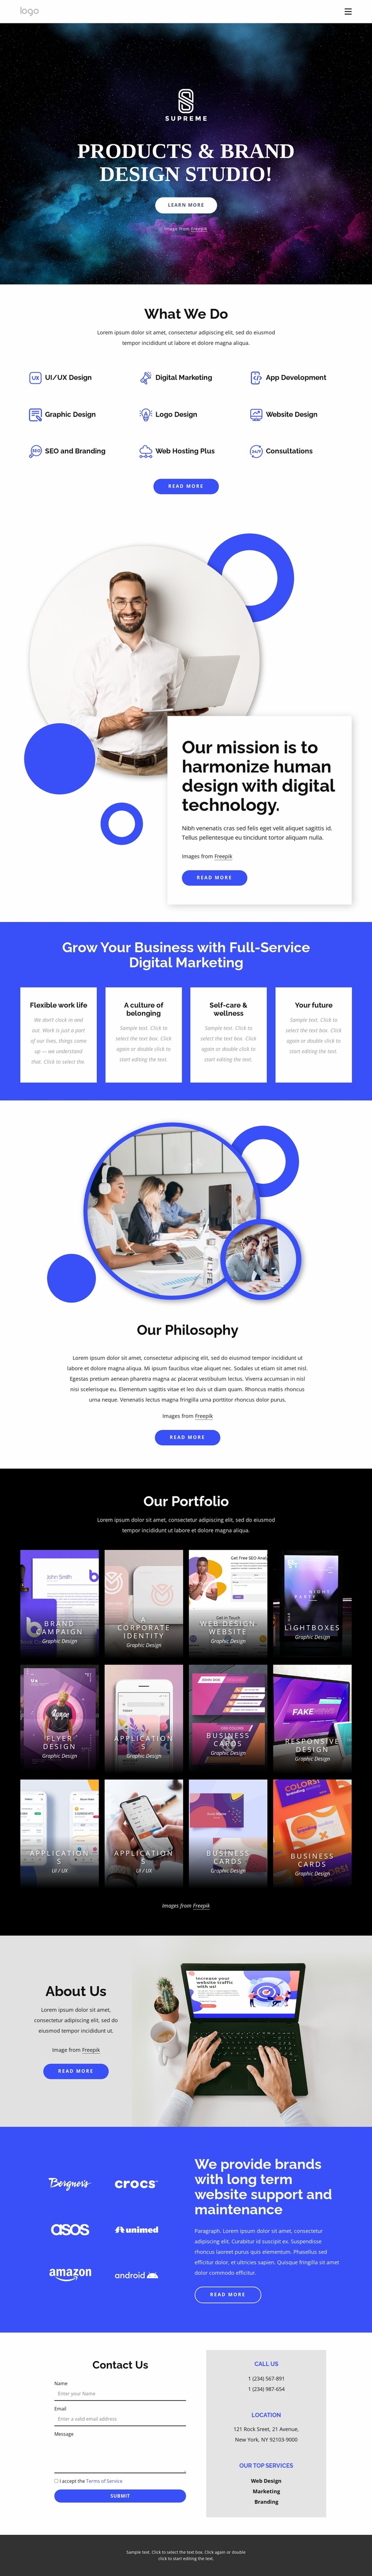 Products and brand design studio Website Template